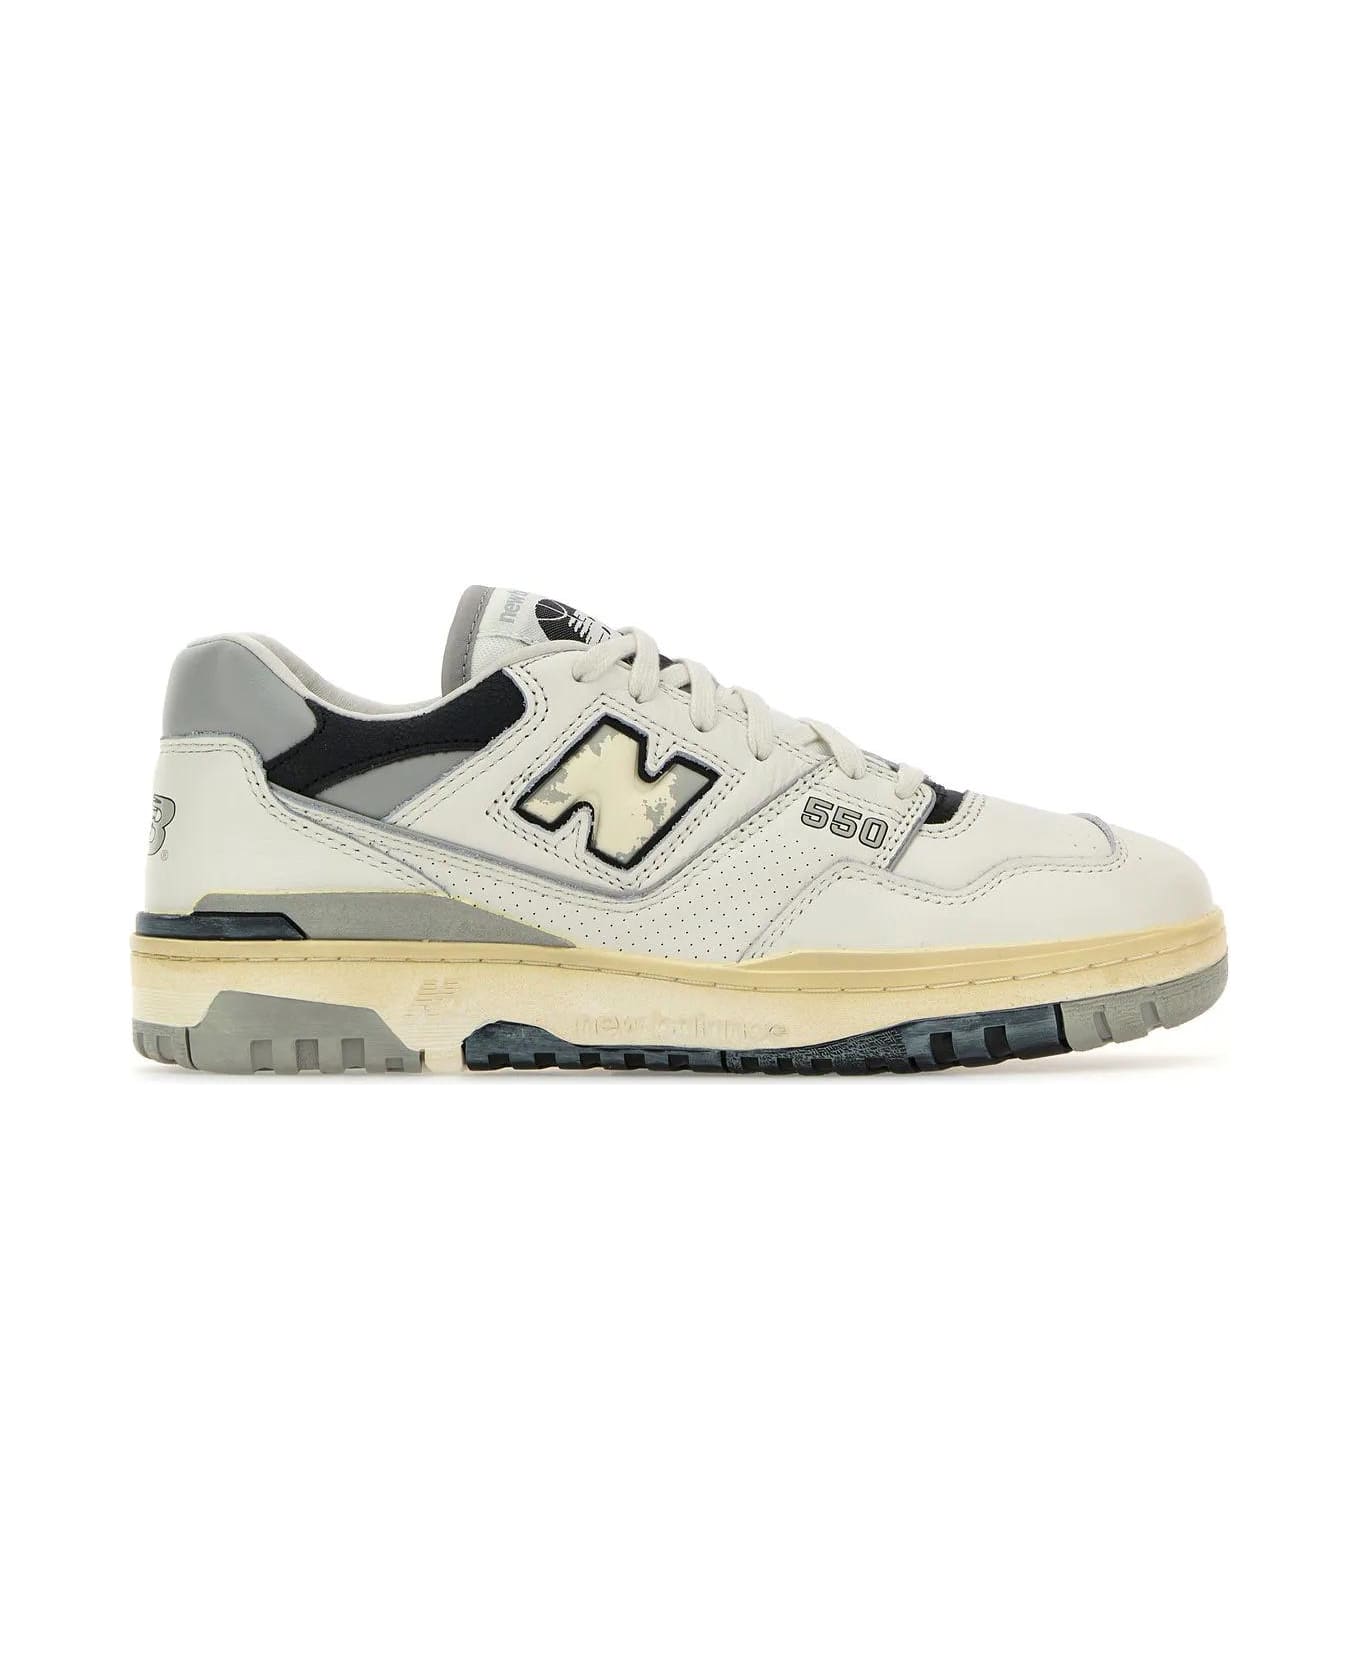 New Balance Multicolor Leather 550 Sneakers スニーカー